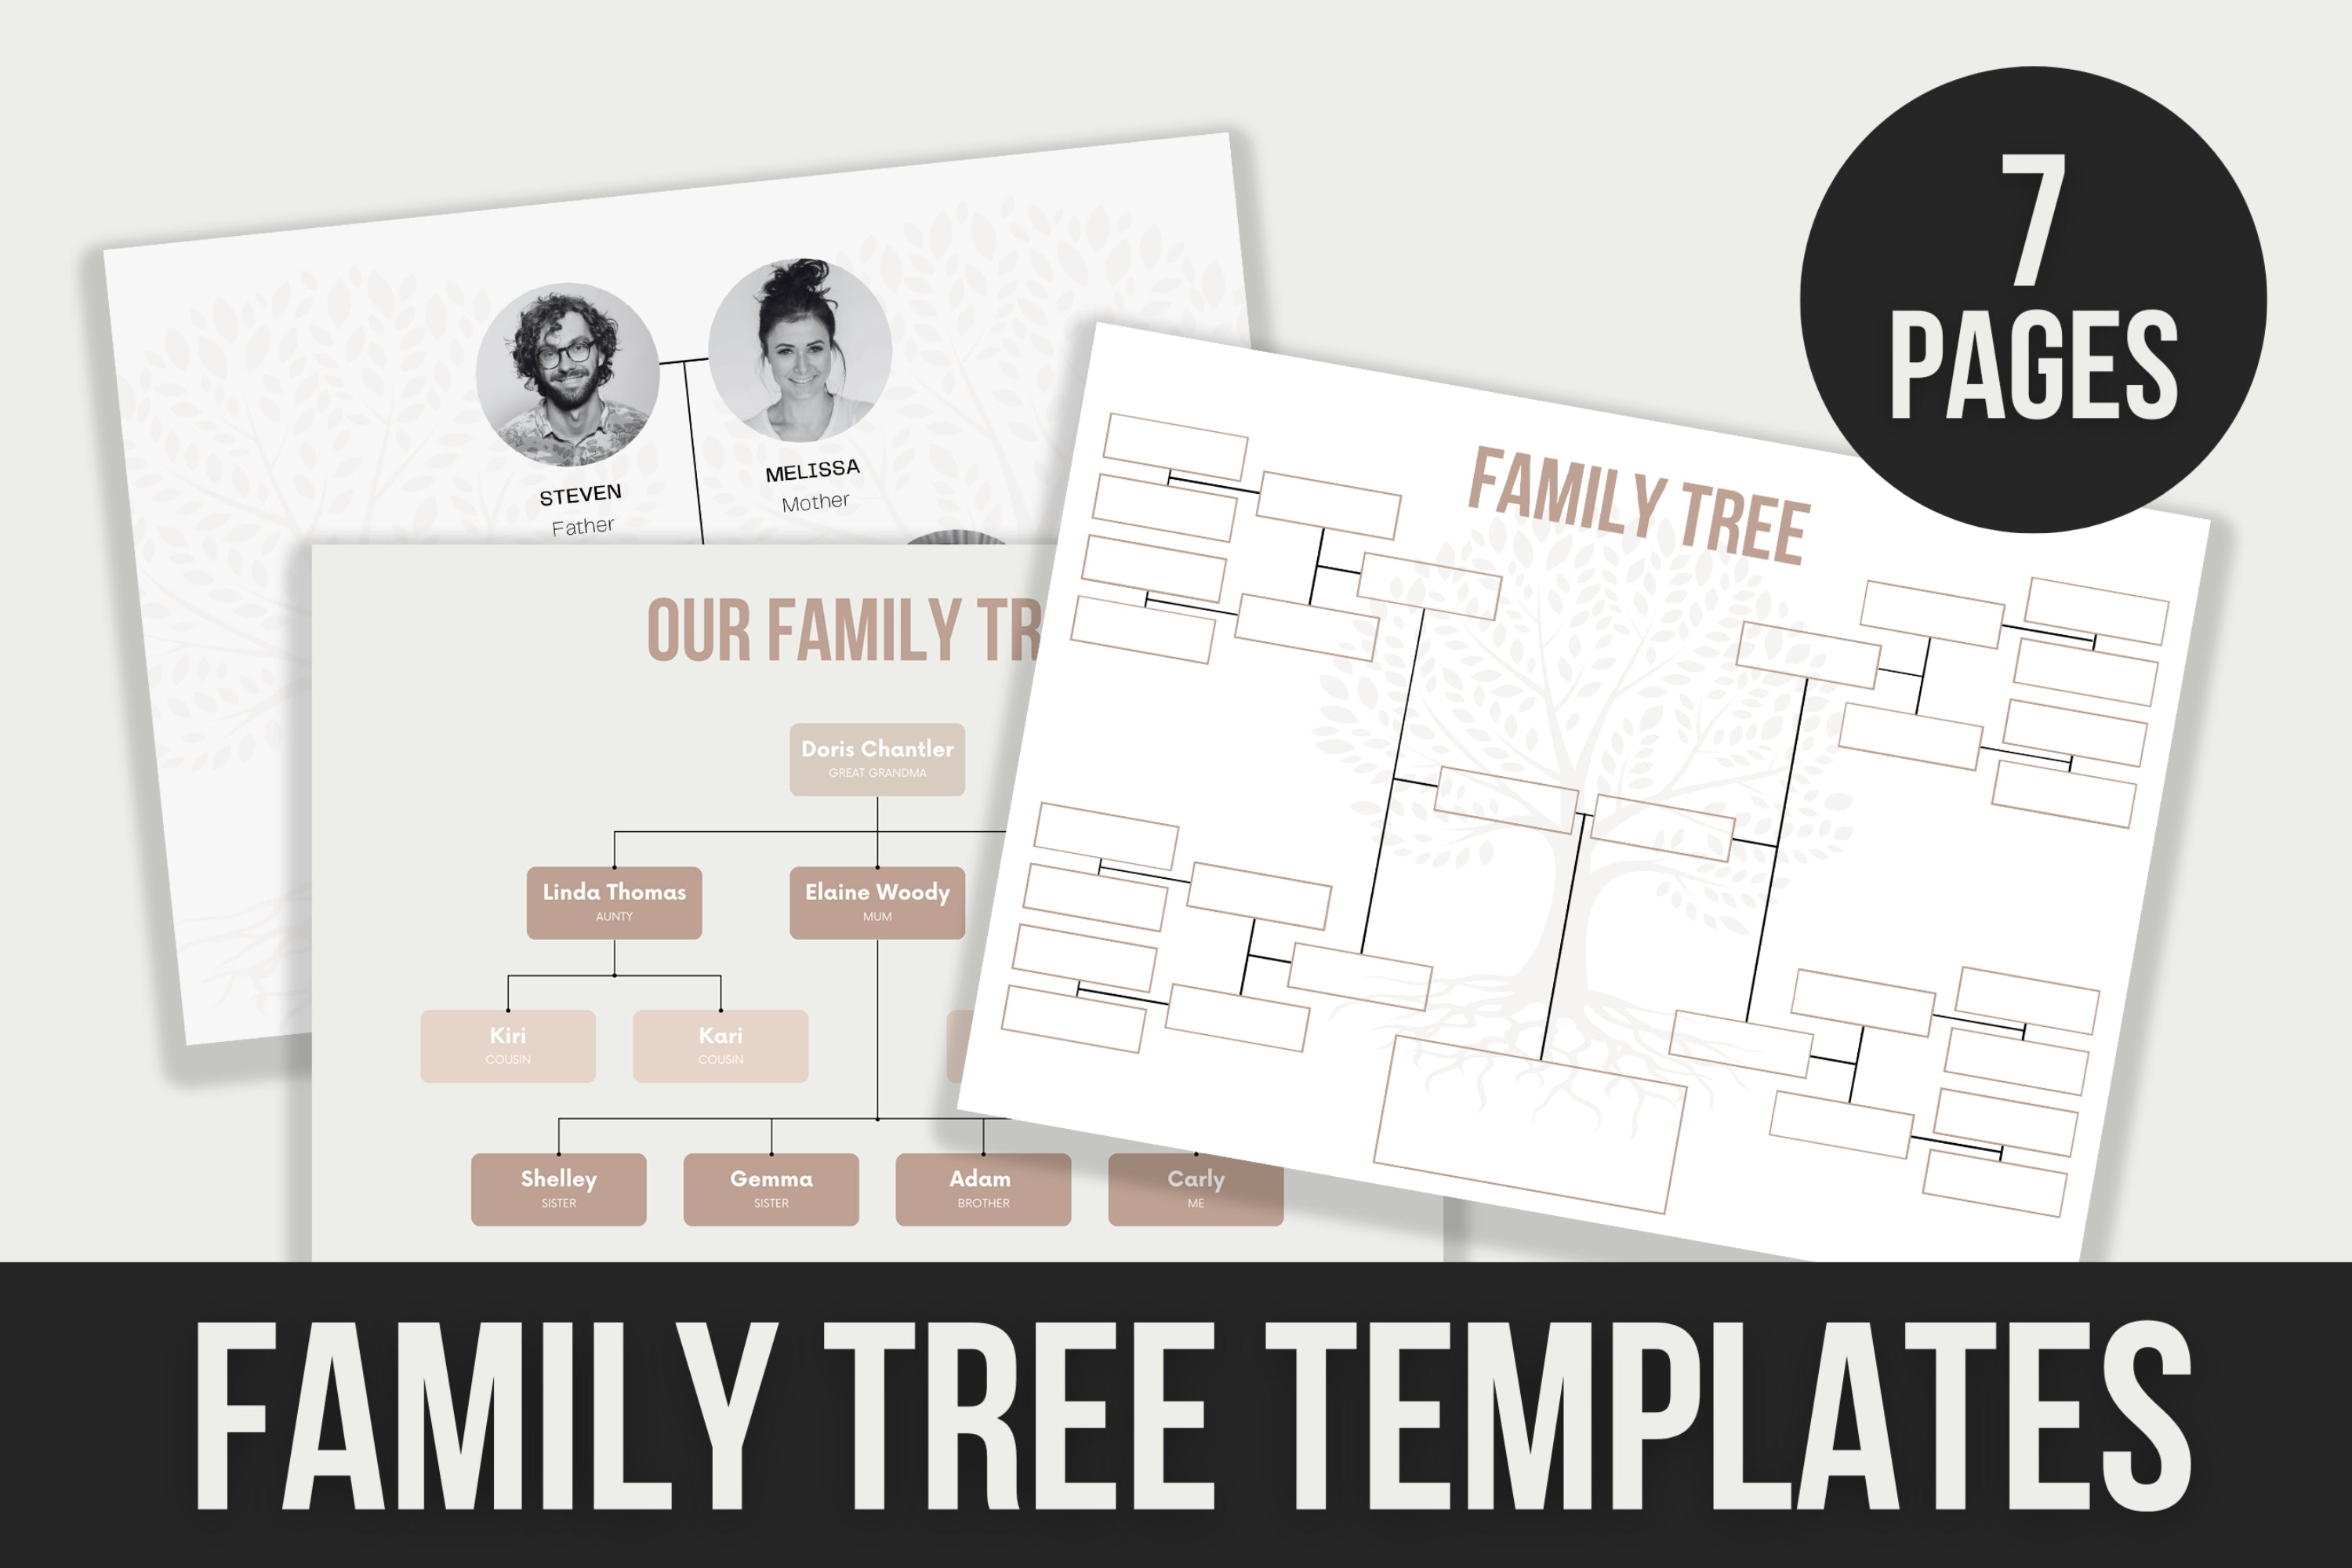 Family Tree Templates - 7 Pages – Viralcontent.design